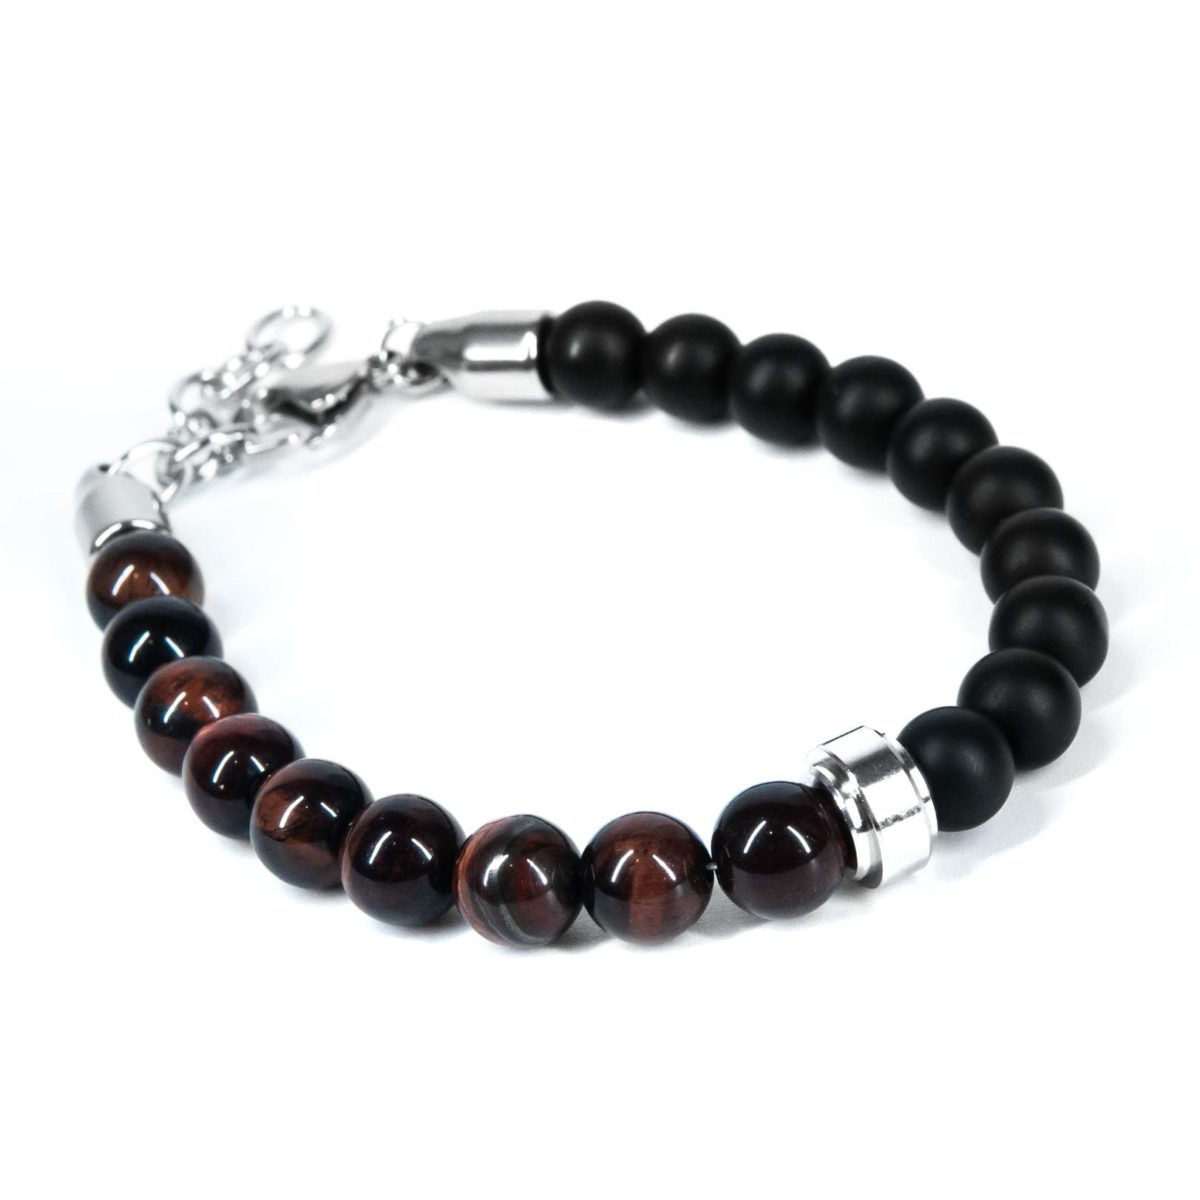 https://m.clubbella.co/product/anson-tiger-eyes-bracelet/ Anson Tiger Eyes bracelet (3)